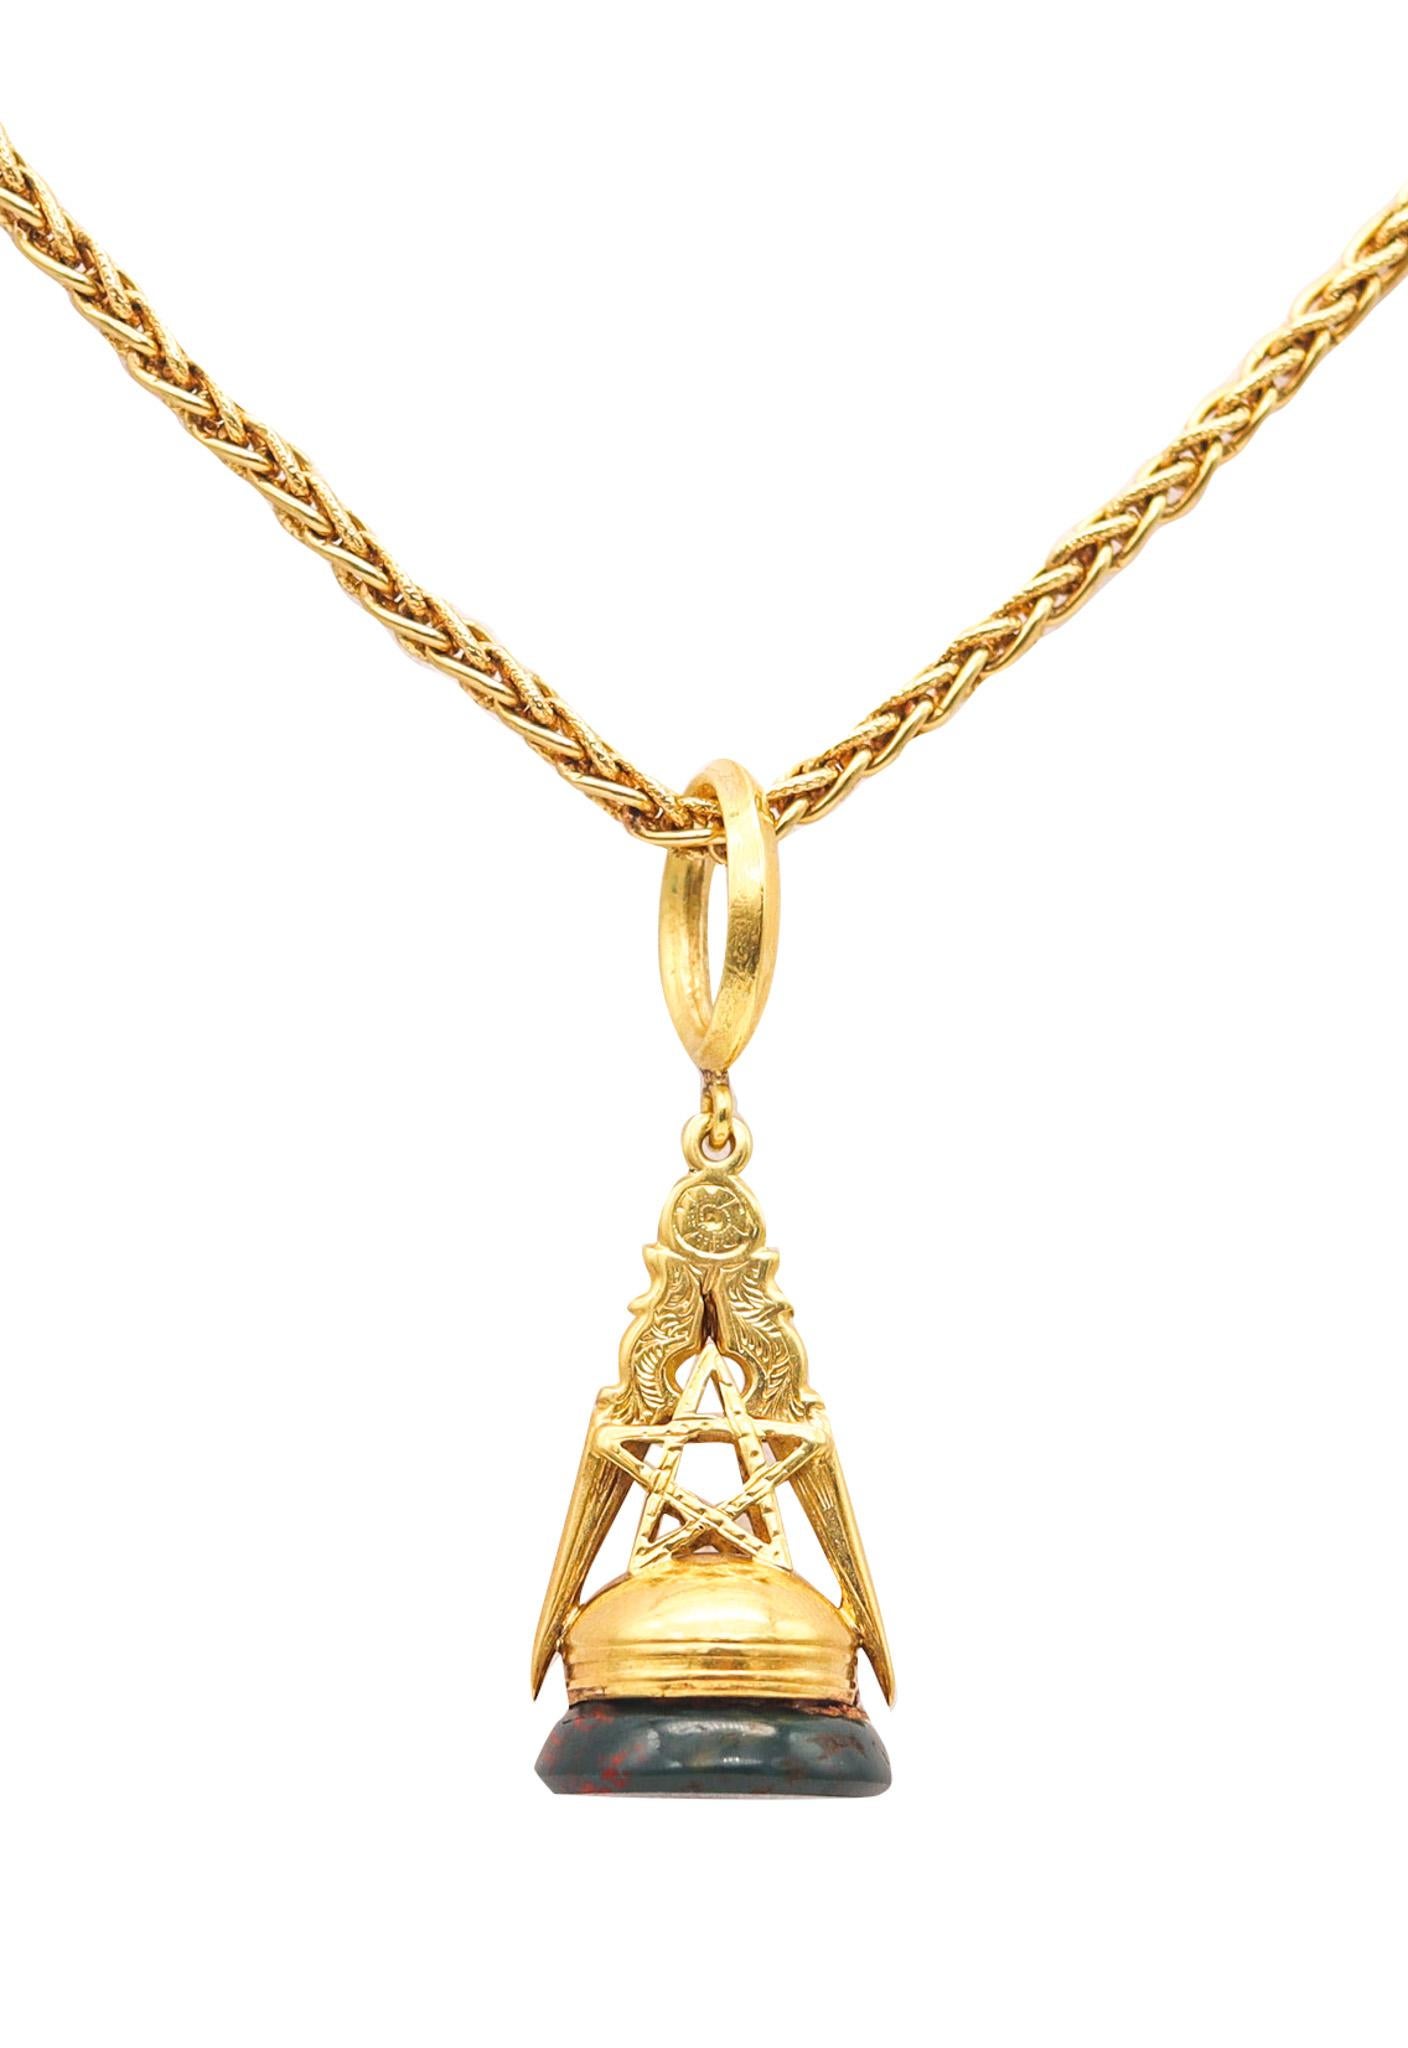 Victorian 1890 Masonic Seal Fob Pendant In 14Kt Gold With Plain Bloodstone